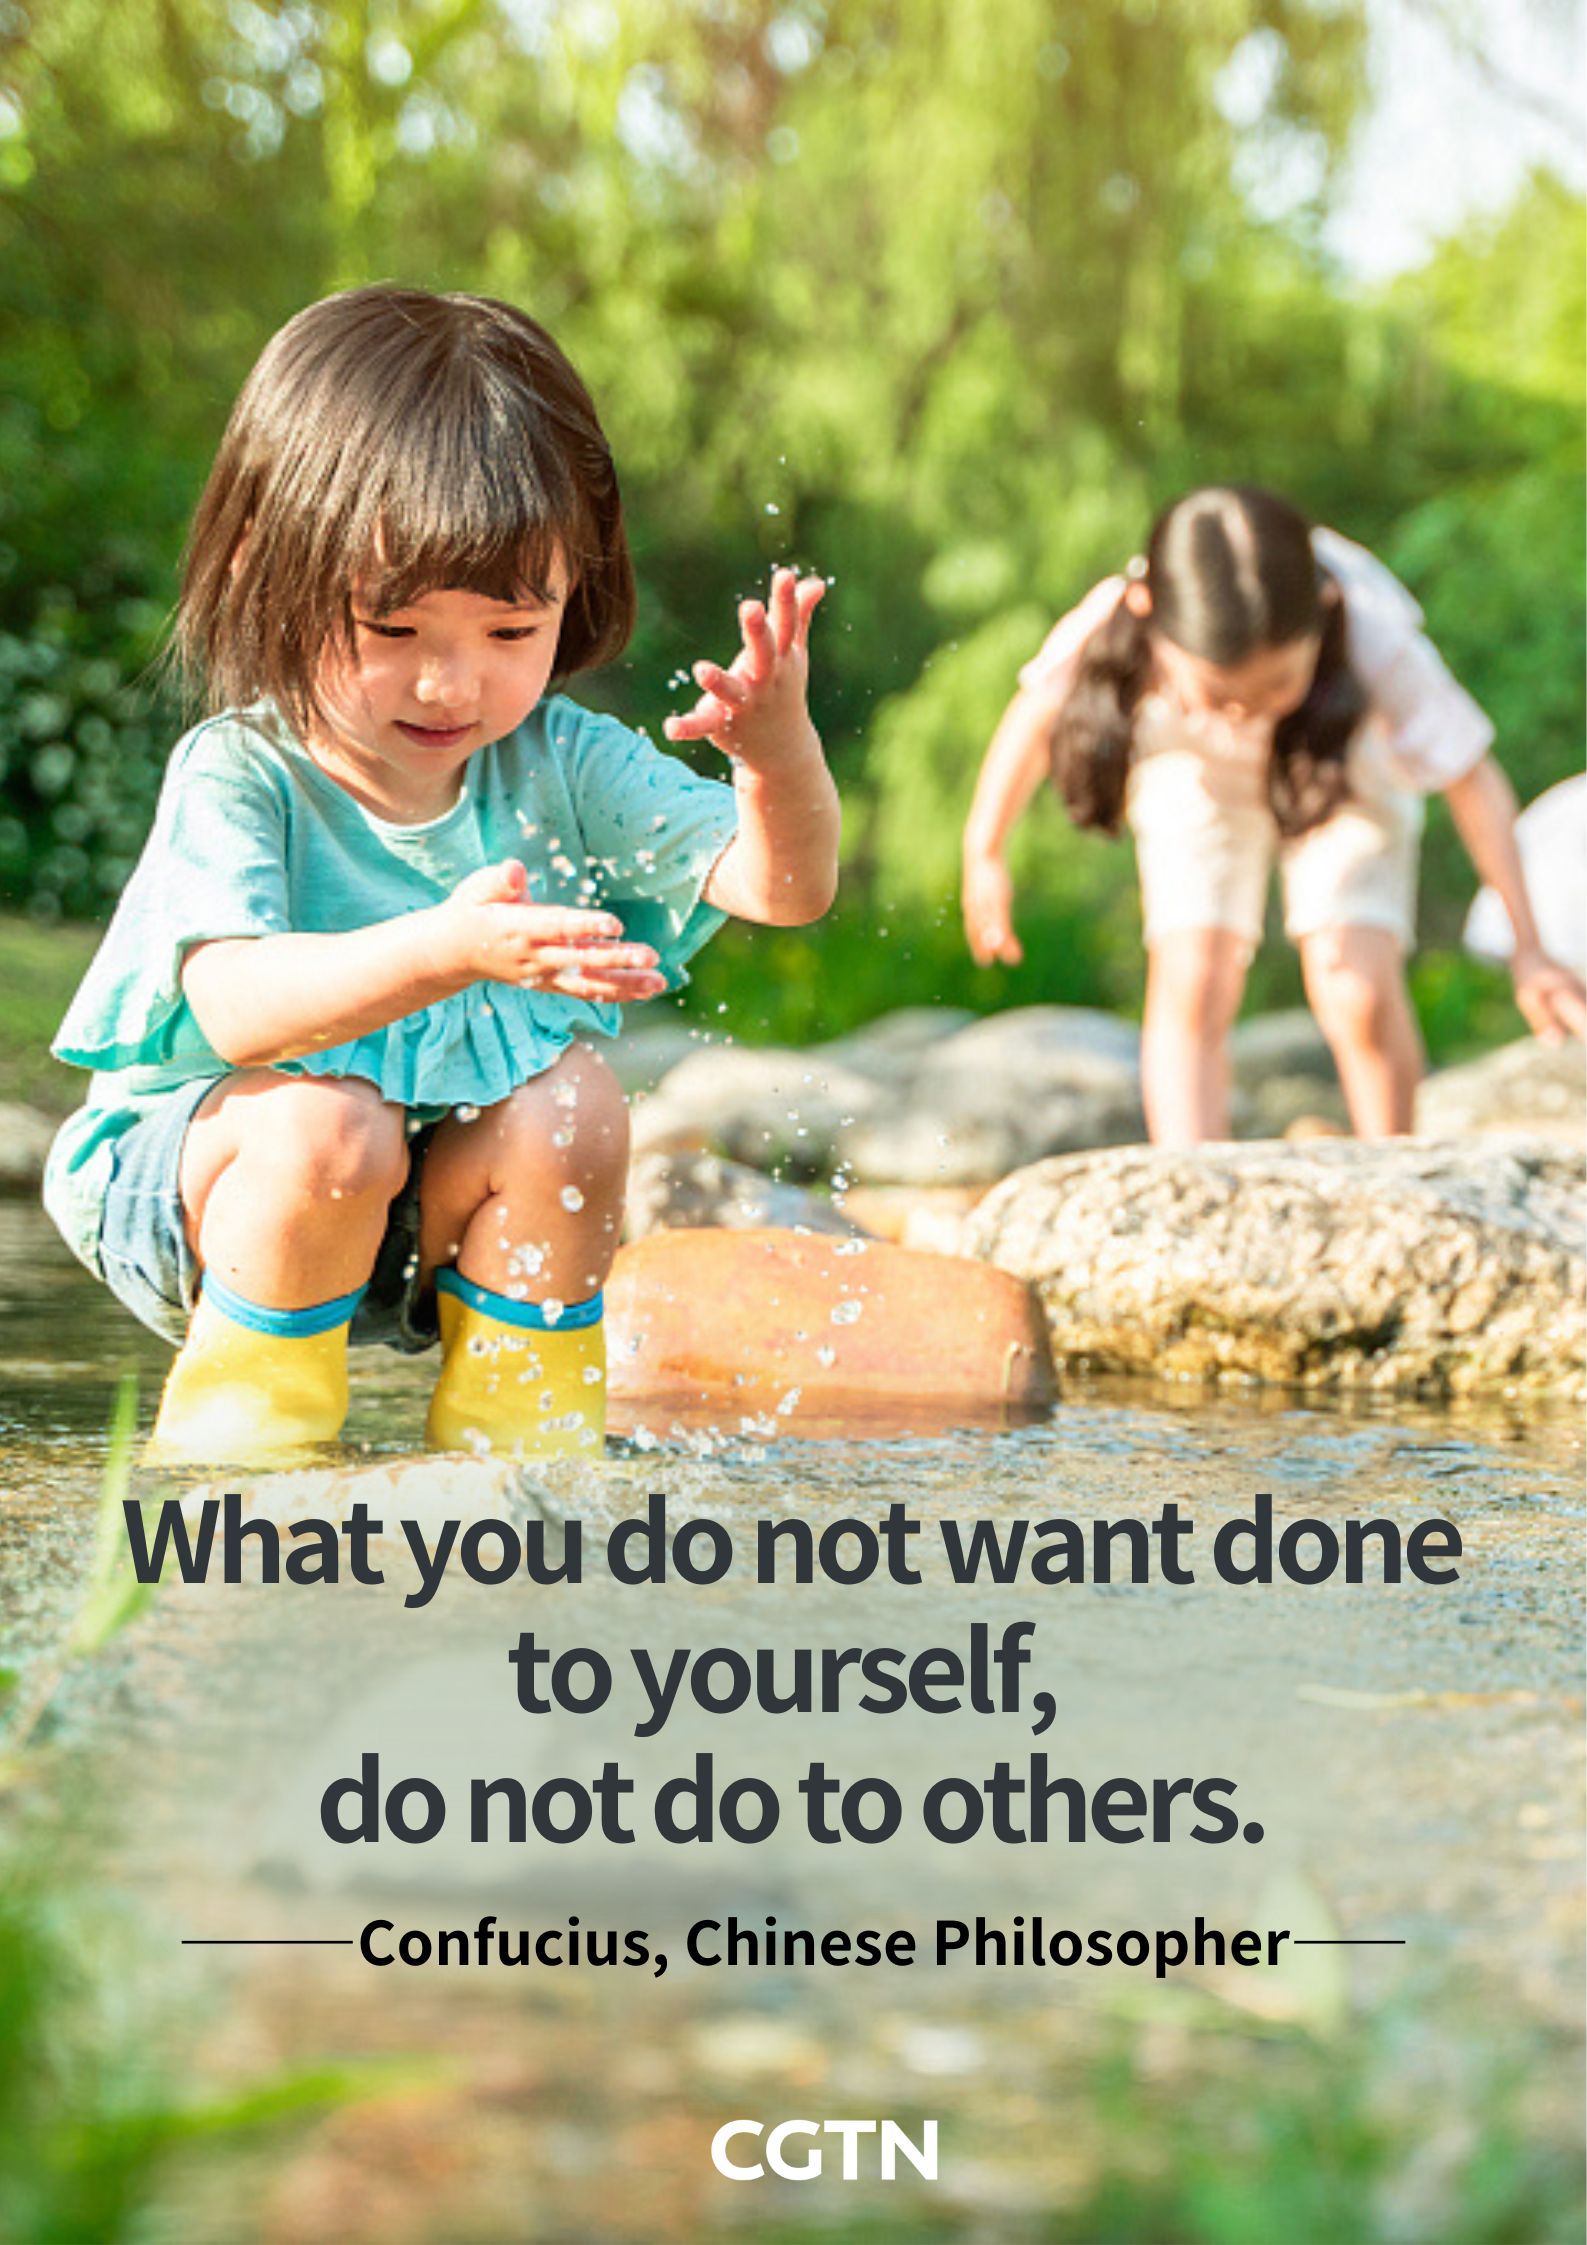 The Confucius quote about treating others with respect